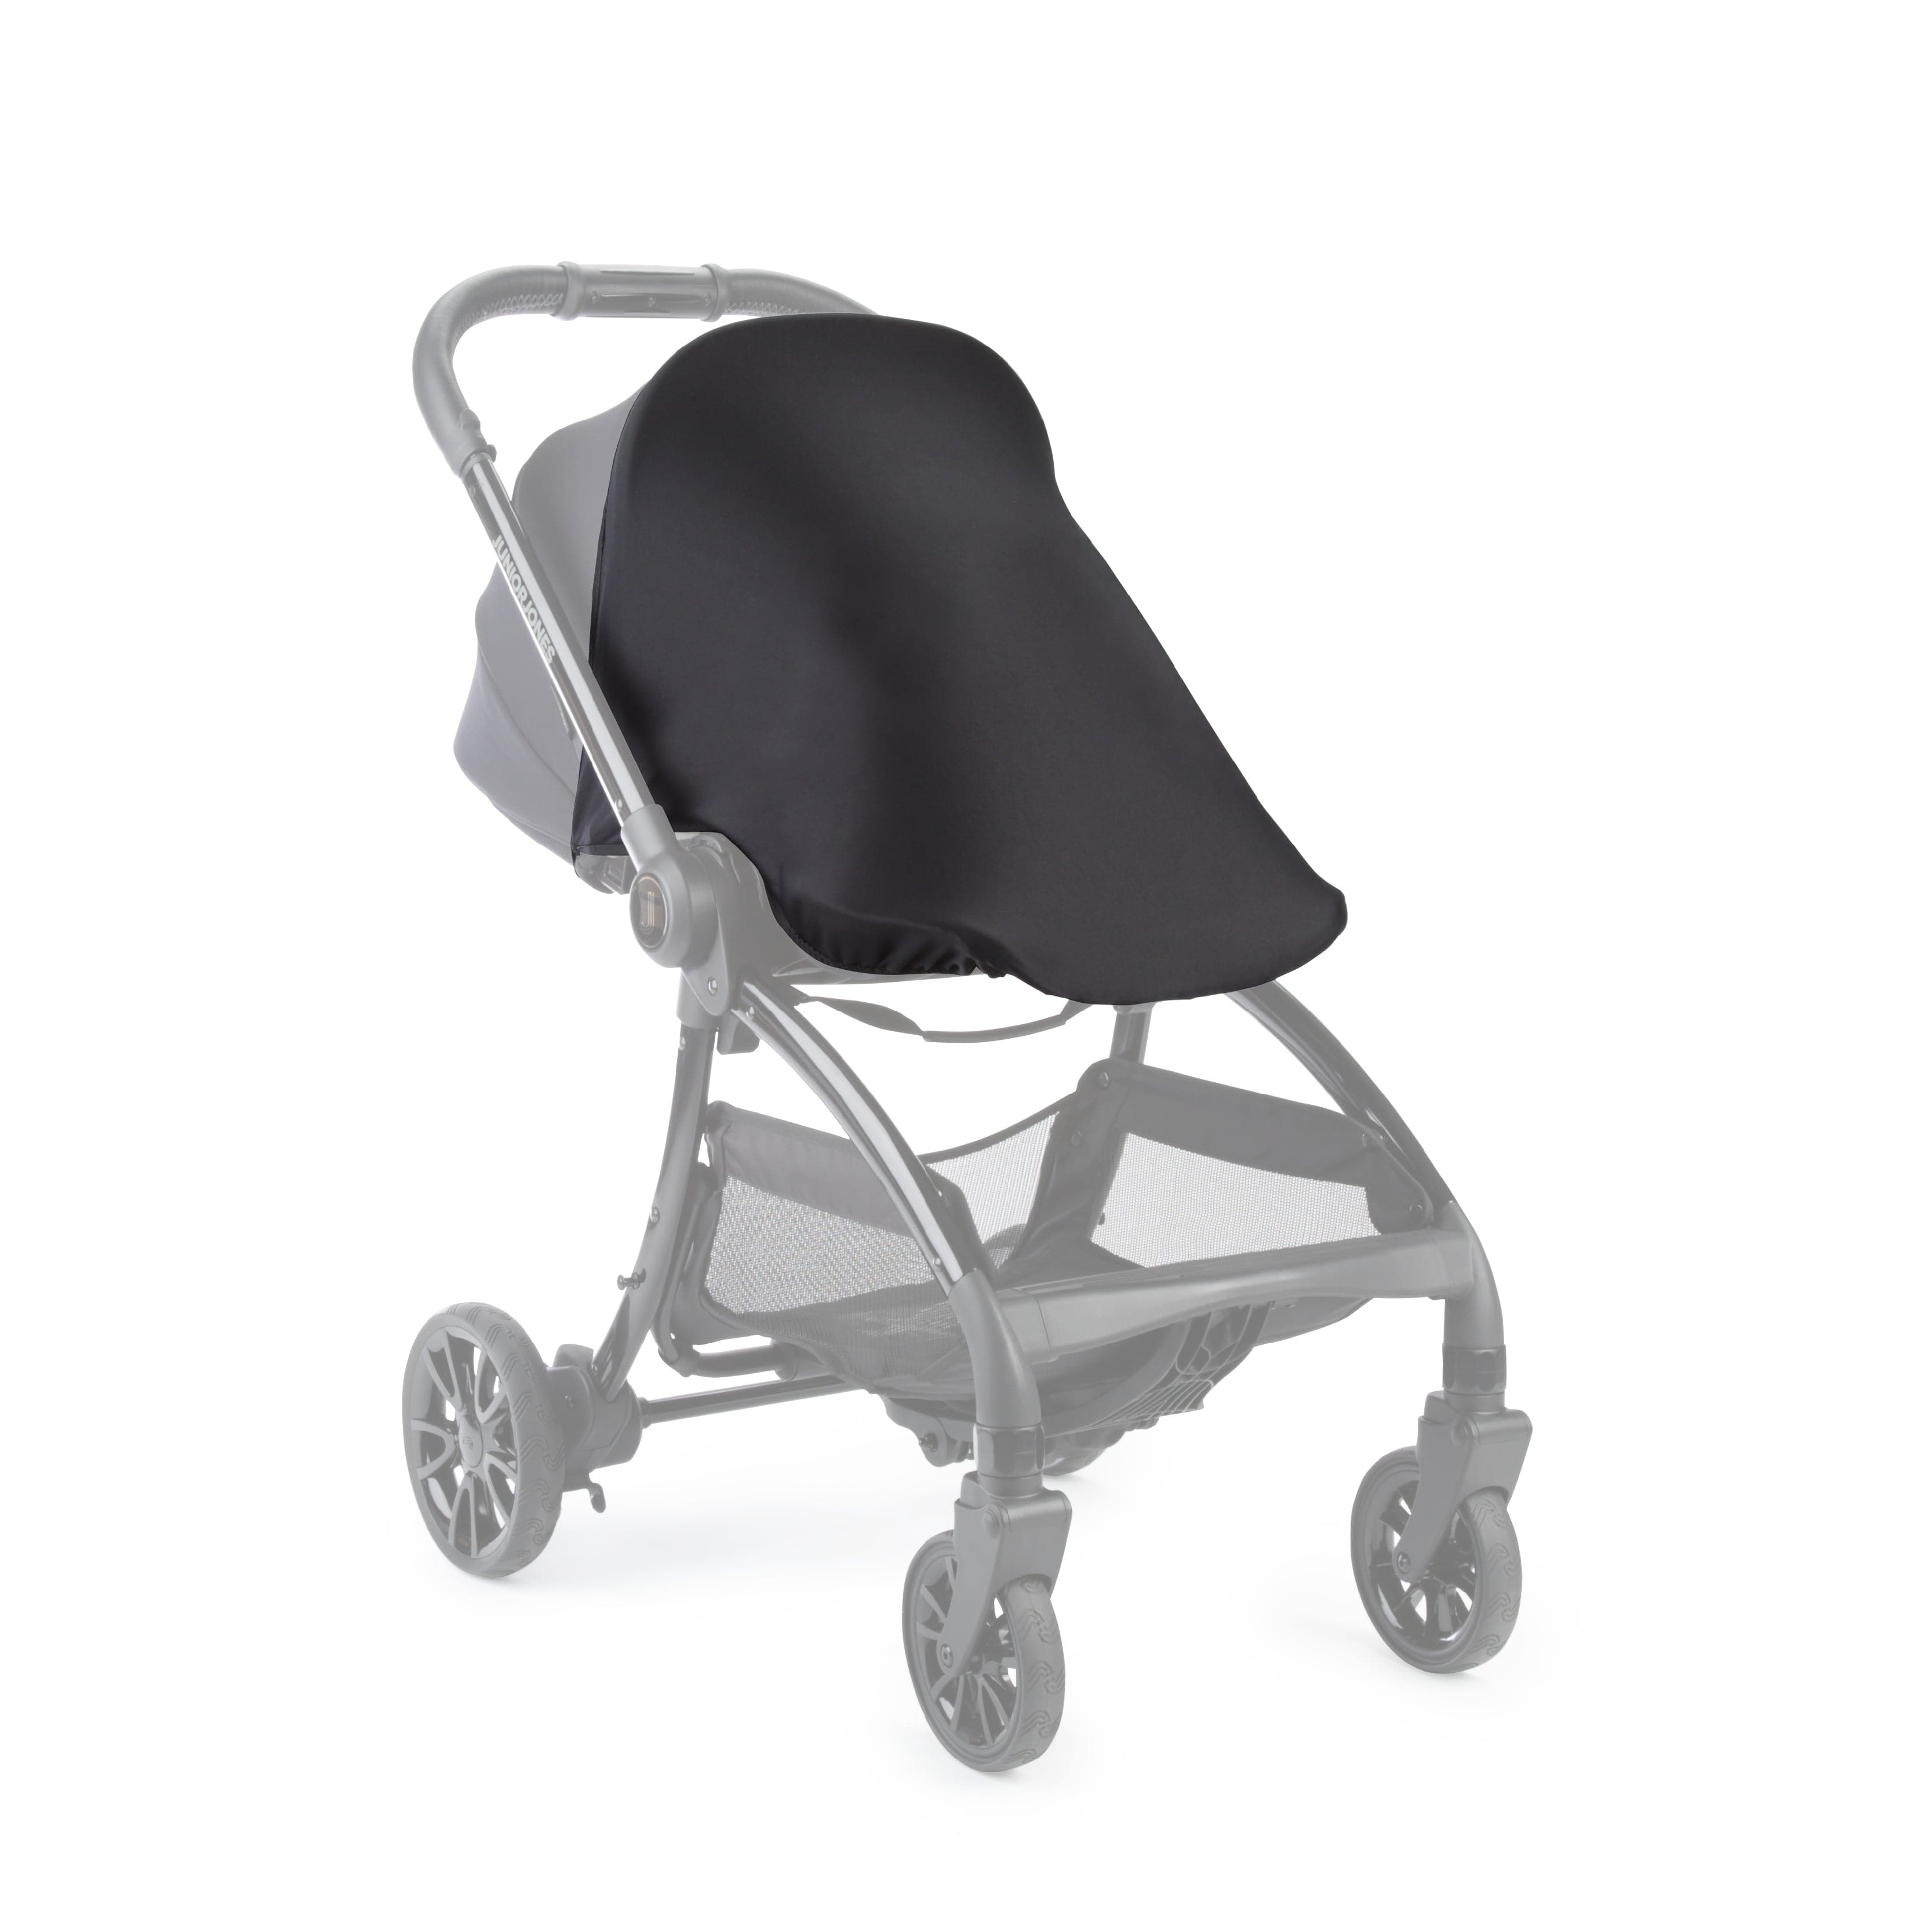 Junior Jones Aylo Grey Marl 11pc Travel System inc Doona Blush Pink Car Seat -  | For Your Little One